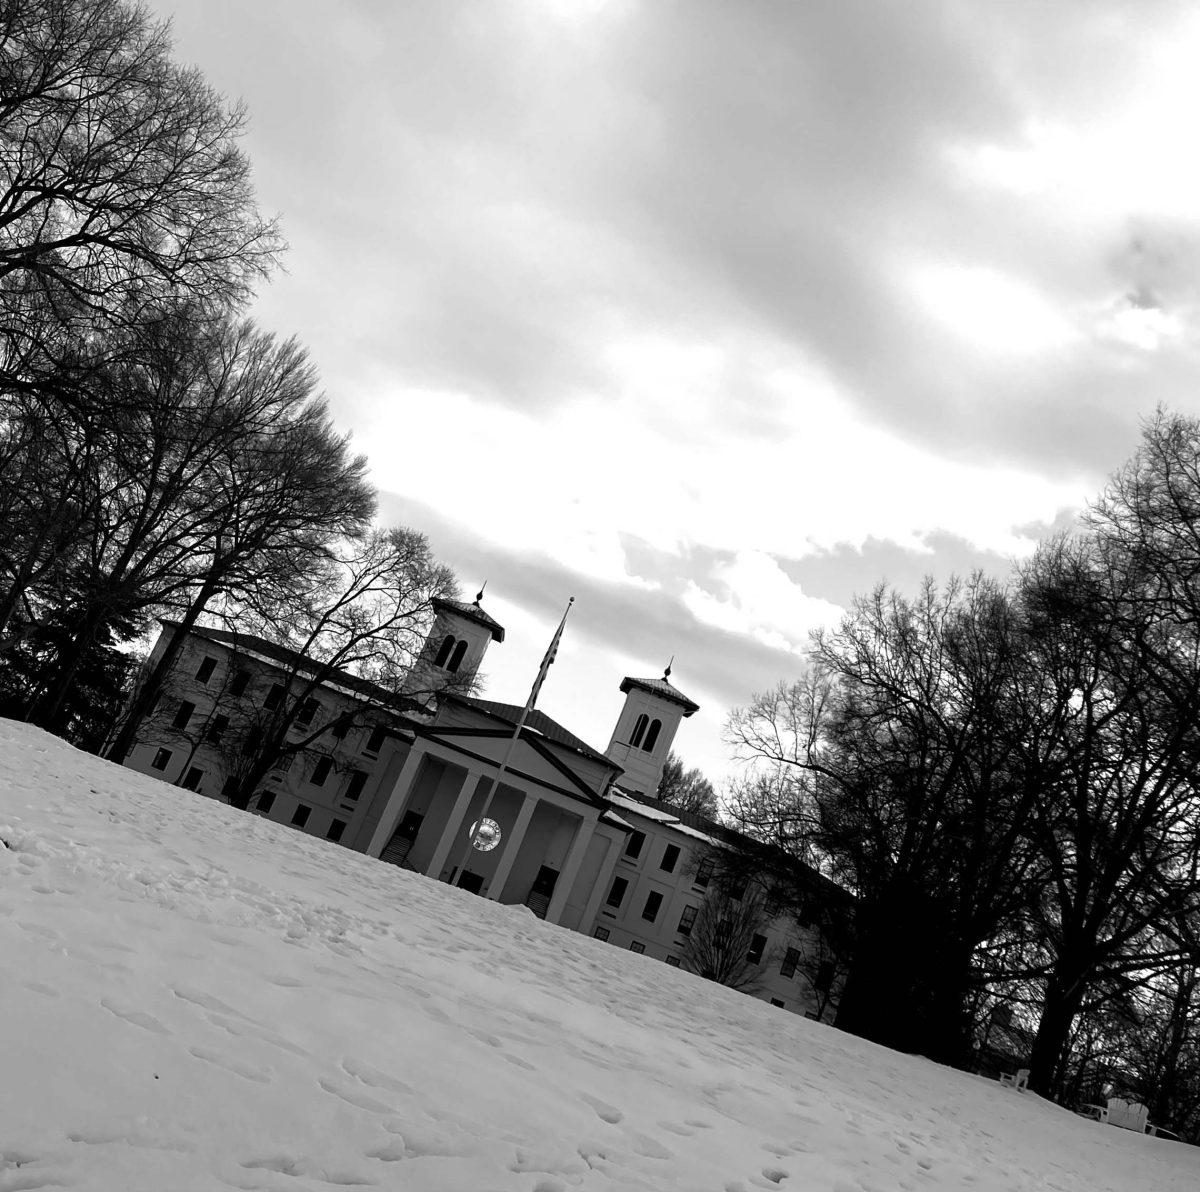 Photo by Anna Lee Hoffman.
Old Main in the snow, Interim 2022. There are no plans to recreate the spring 2021 Interim semester, which instead saw students enjoy their Interim during warmer weather. 